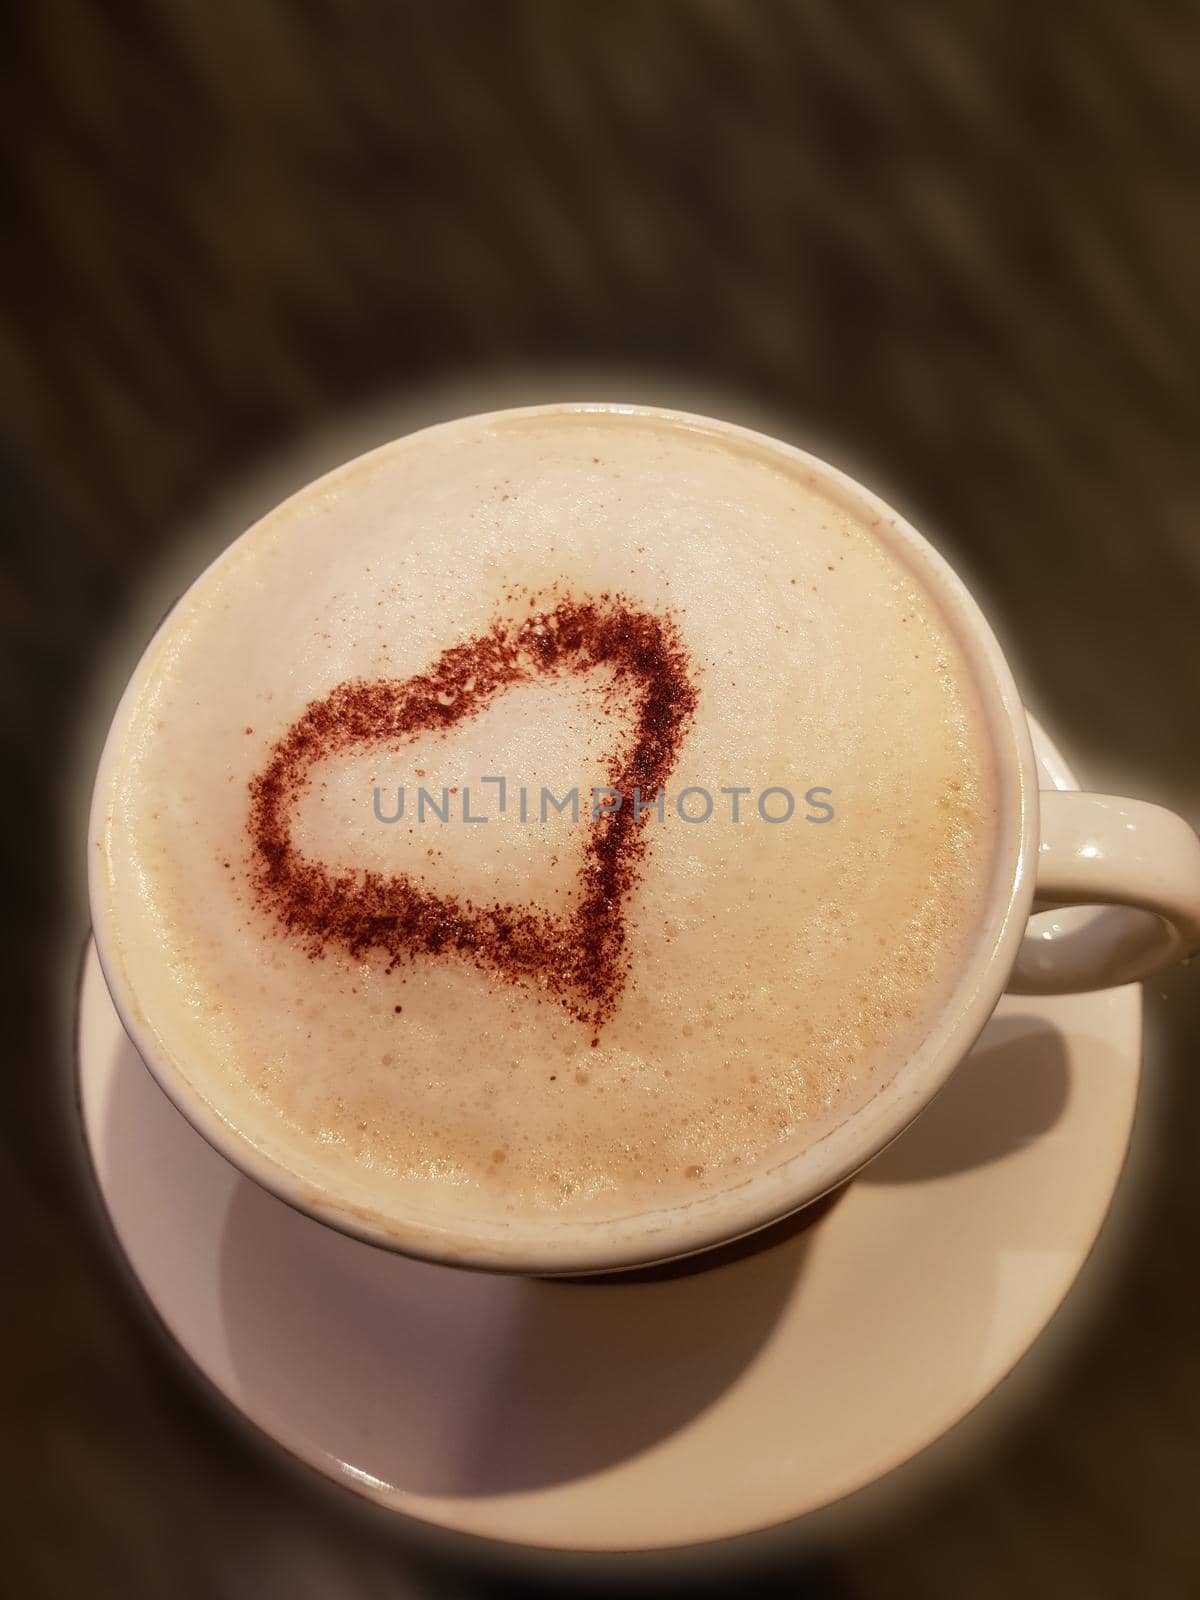 A cup of coffee on dark blurred background with motion blur. For example, a company name could easily be pasted on behind the cup.